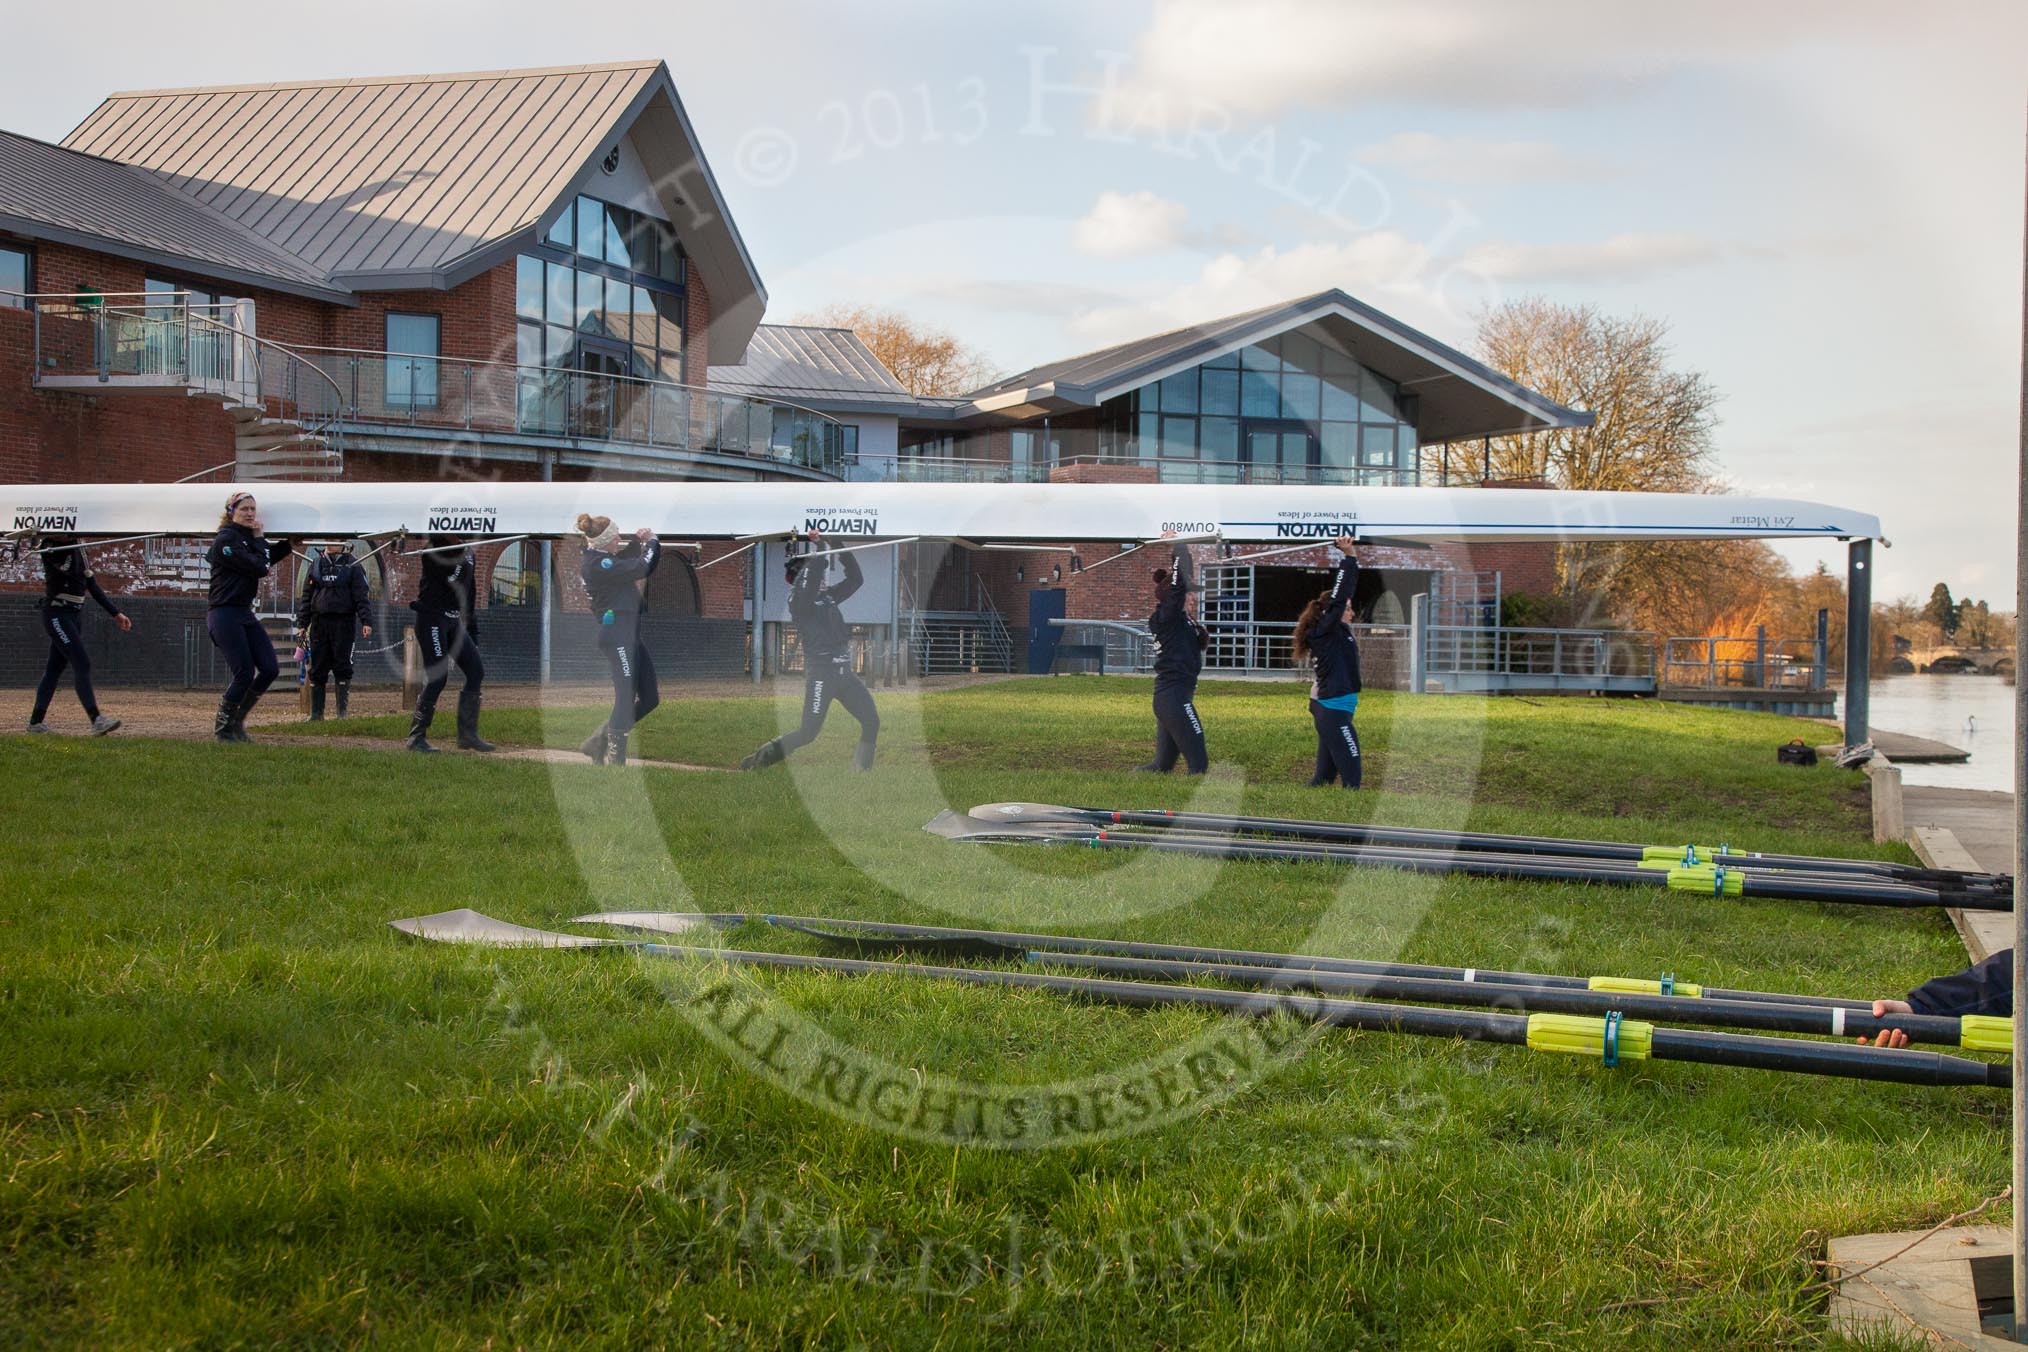 The Boat Race season 2013 - OUWBC training: The Oxford University Fleming Boathouse in Wallingford, OUWBC's Bloe Boat and reserve boat Osiris getting ready for a training session..
Fleming Boathouse,
Wallingford,
Oxfordshire,
United Kingdom,
on 13 March 2013 at 16:49, image #19